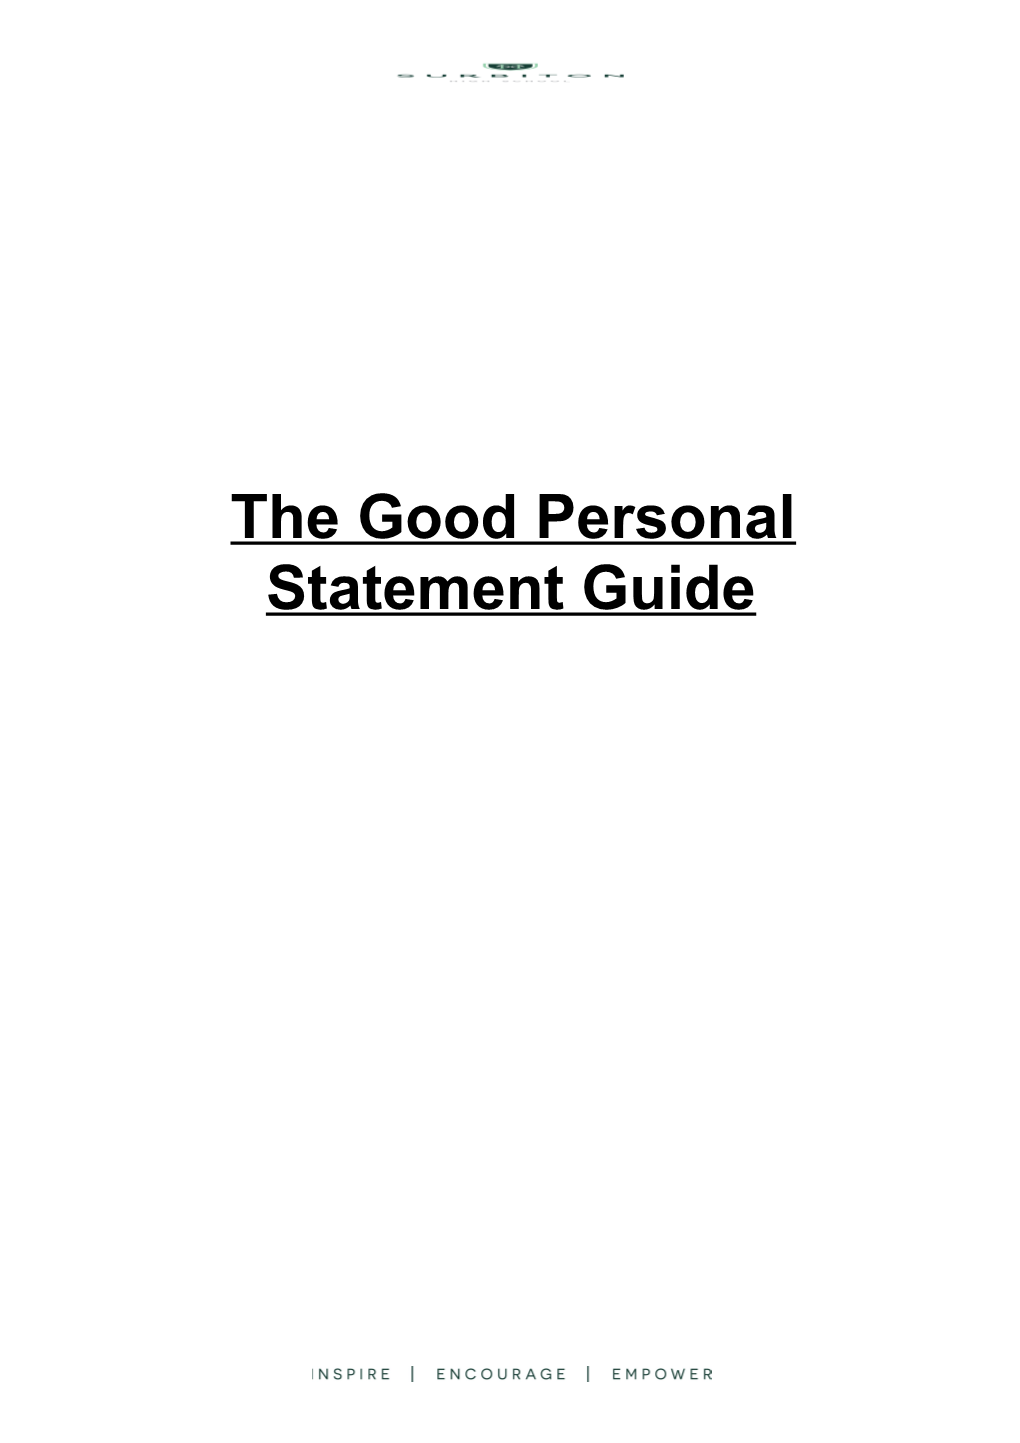 The Good Personal Statement Guide